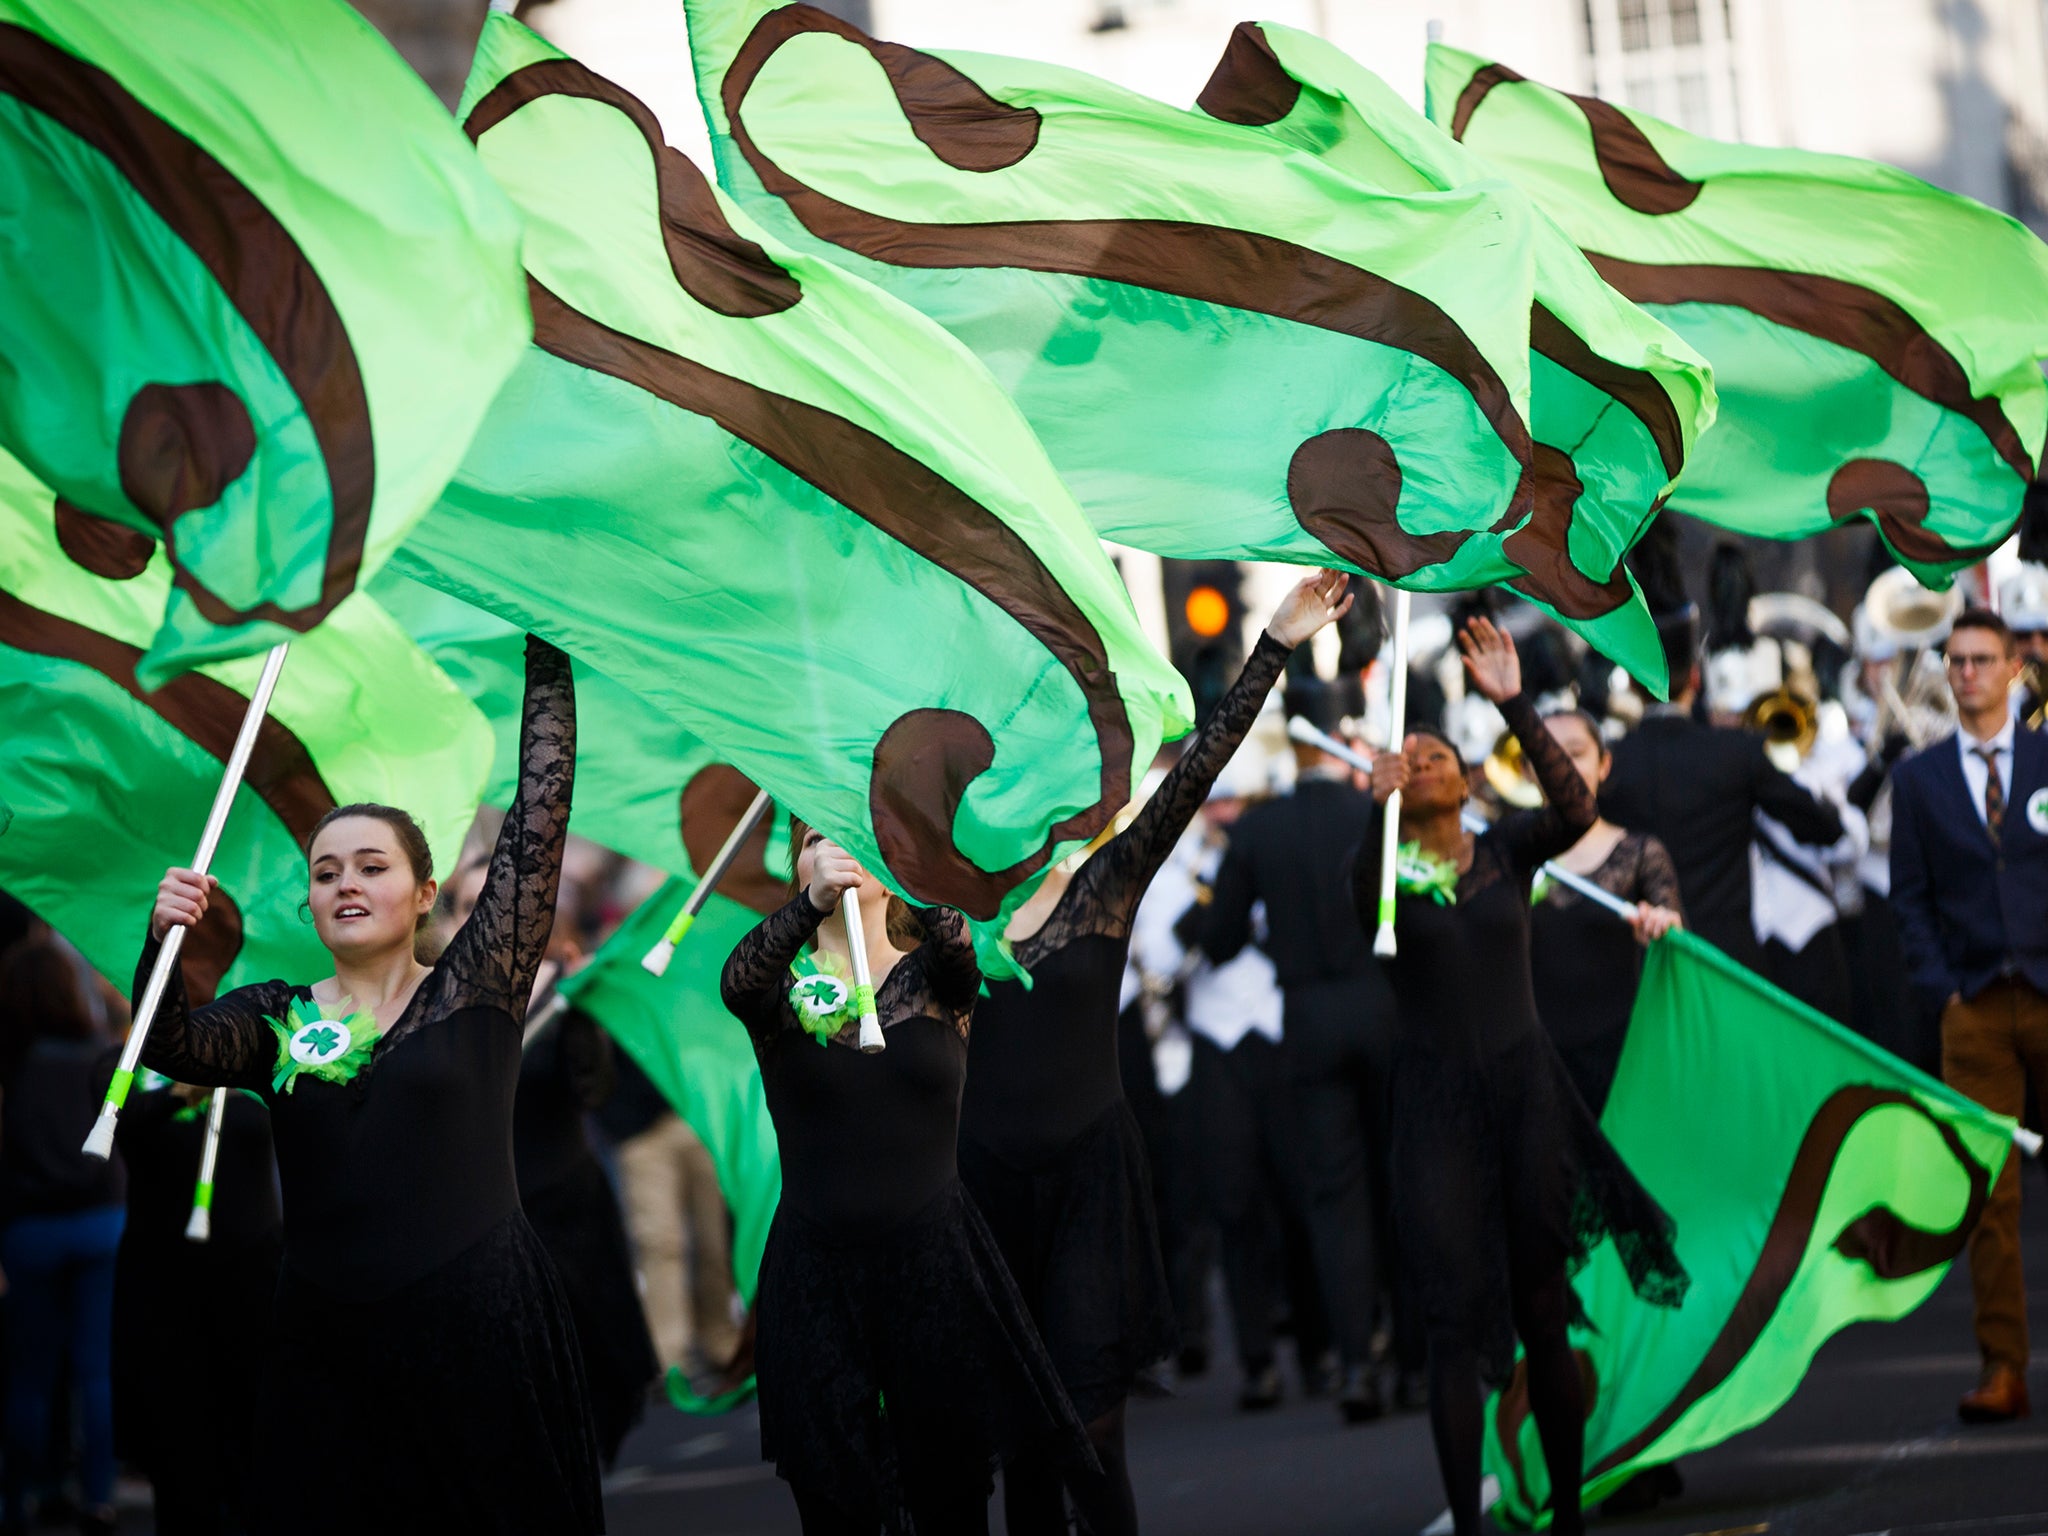 Members of the Coppell High School Marching Band take part in the St Patrick's Day parade through central London